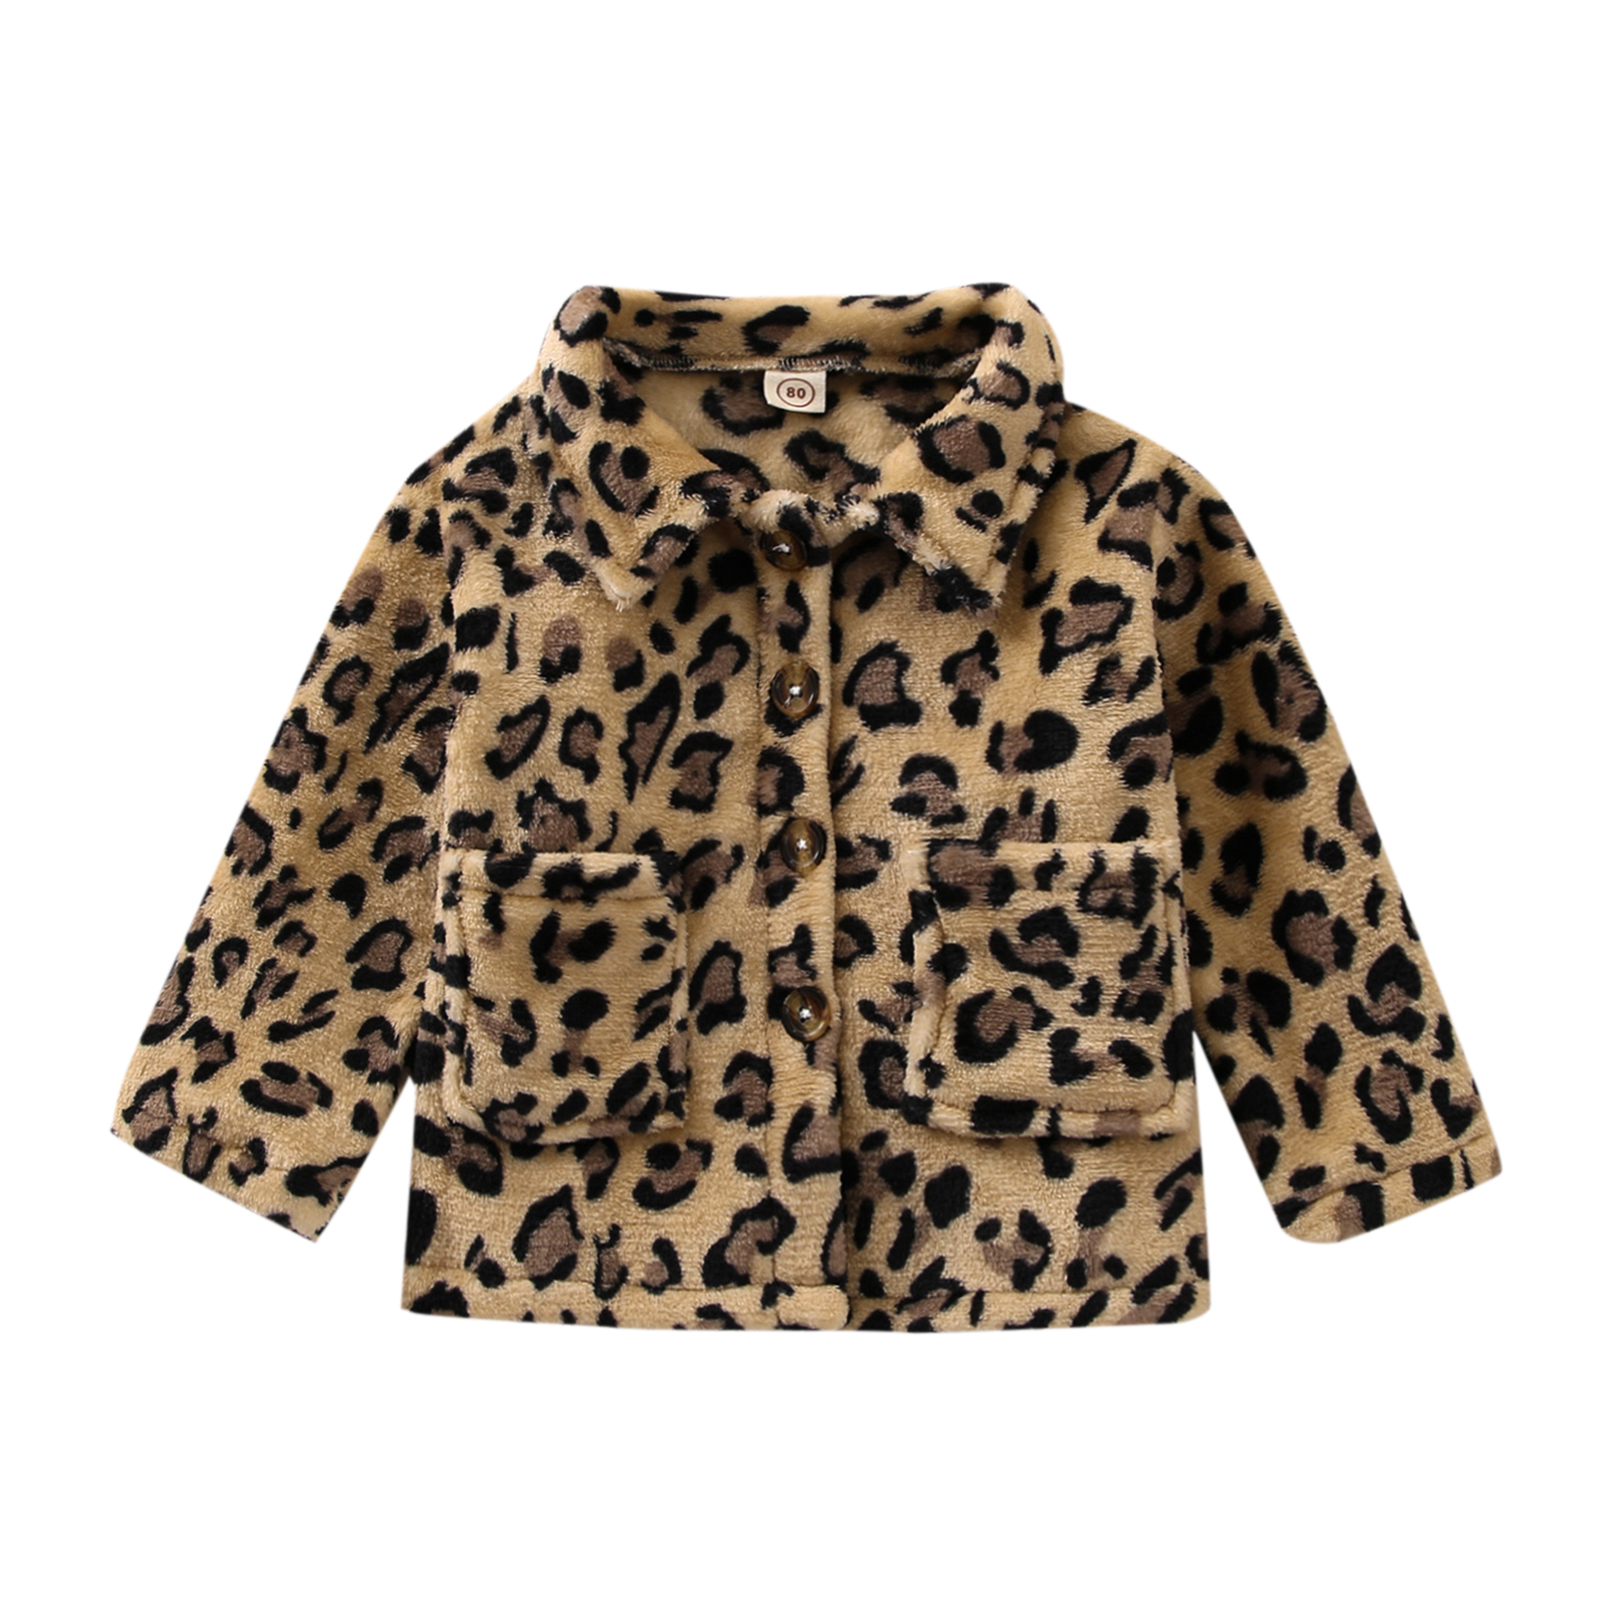 Musuos Toddler Baby Winter Jacket, Fashion Long Sleeve Leopard Print Button Down Plush Coat - image 1 of 10